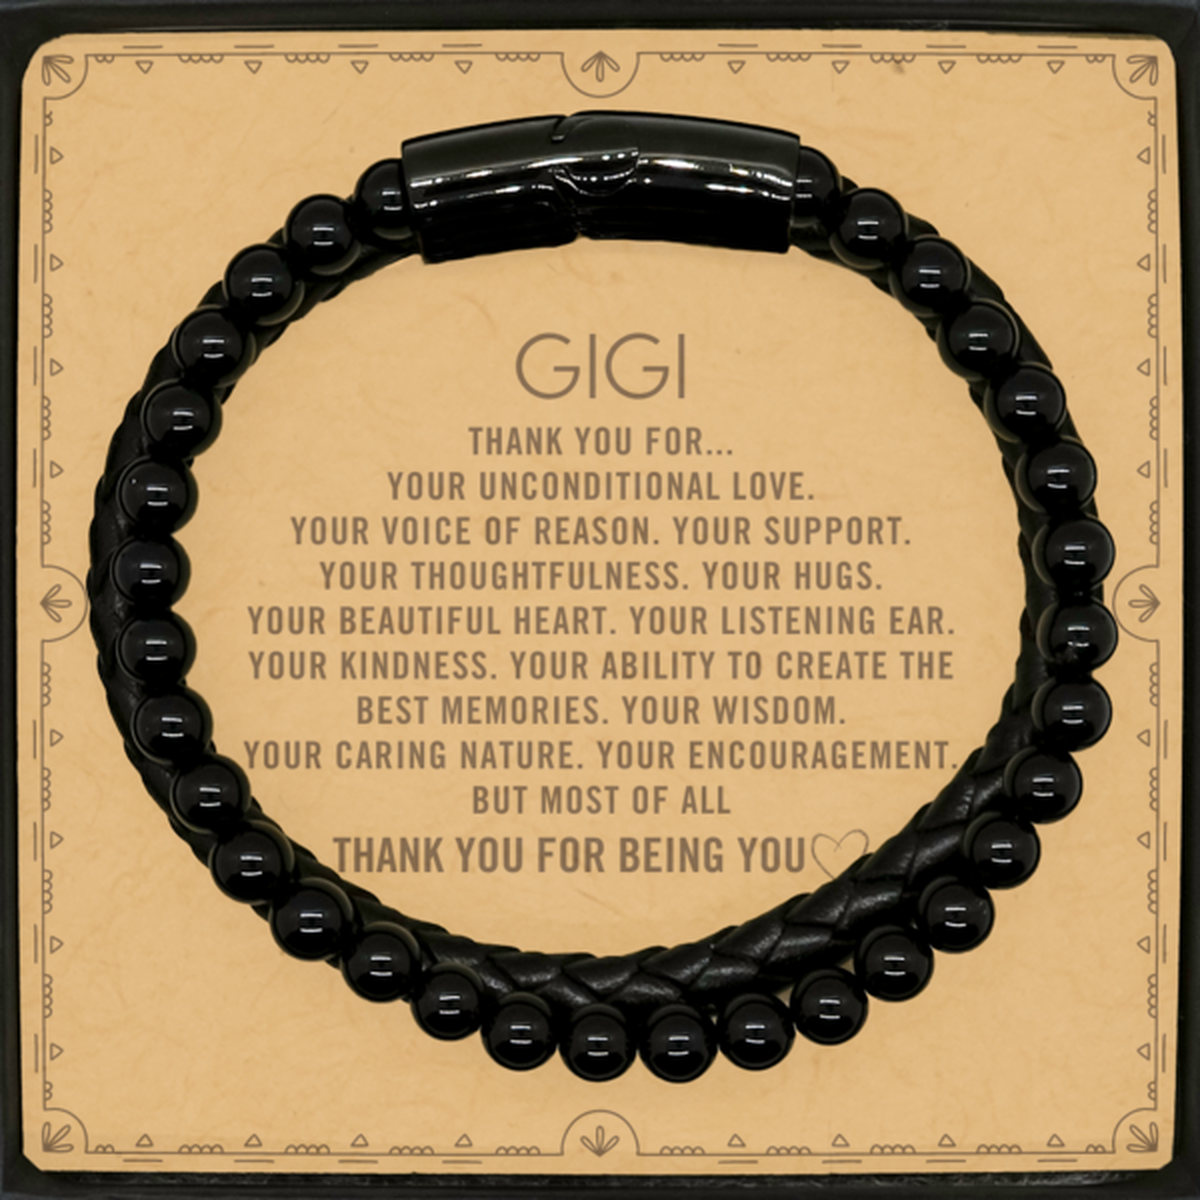 Gigi Stone Leather Bracelets Custom, Message Card Gifts For Gigi Christmas Graduation Birthday Gifts for Men Women Gigi Thank you for Your unconditional love